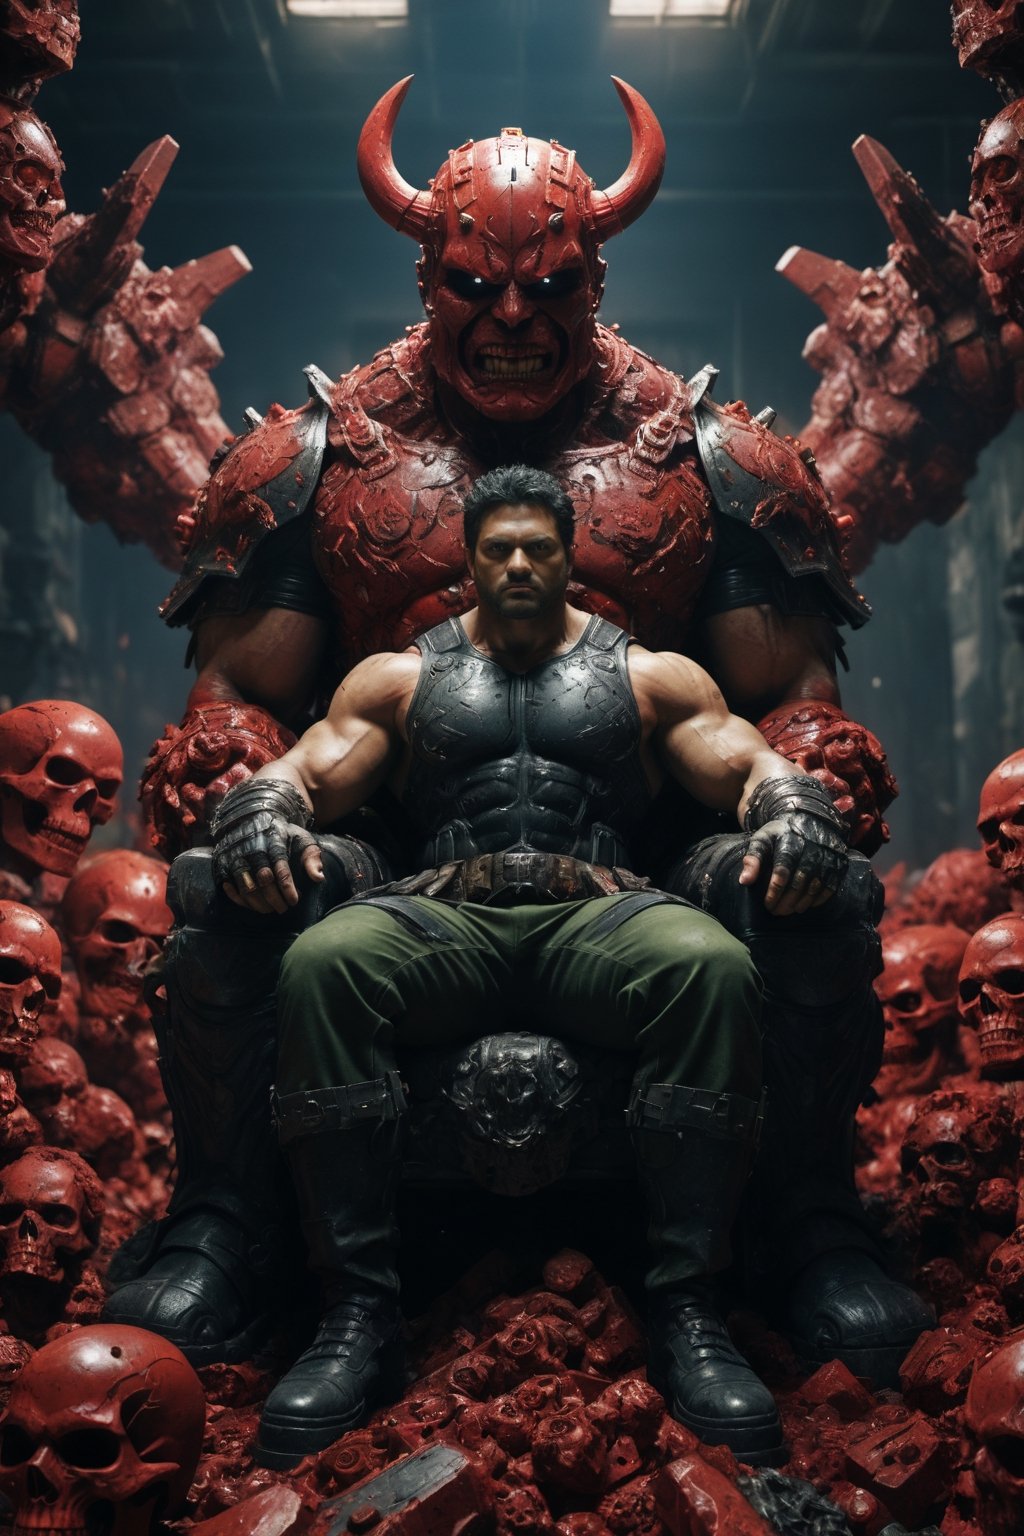 A legendary shot of hulk in a dark and gritty setting. He is sitting on a throne of skulls, surrounded by the detritus of battle. The pose is dynamic and engaging, with hulk looking directly at the viewer. The colors are vibrant and saturated, with a strong emphasis on red and black. The level of detail is incredible, with every skull and every piece of armor rendered in stunning realism. The image has been post-processed to add even more detail and atmosphere. The overall effect is one of ultra-realism and cinematic quality.

